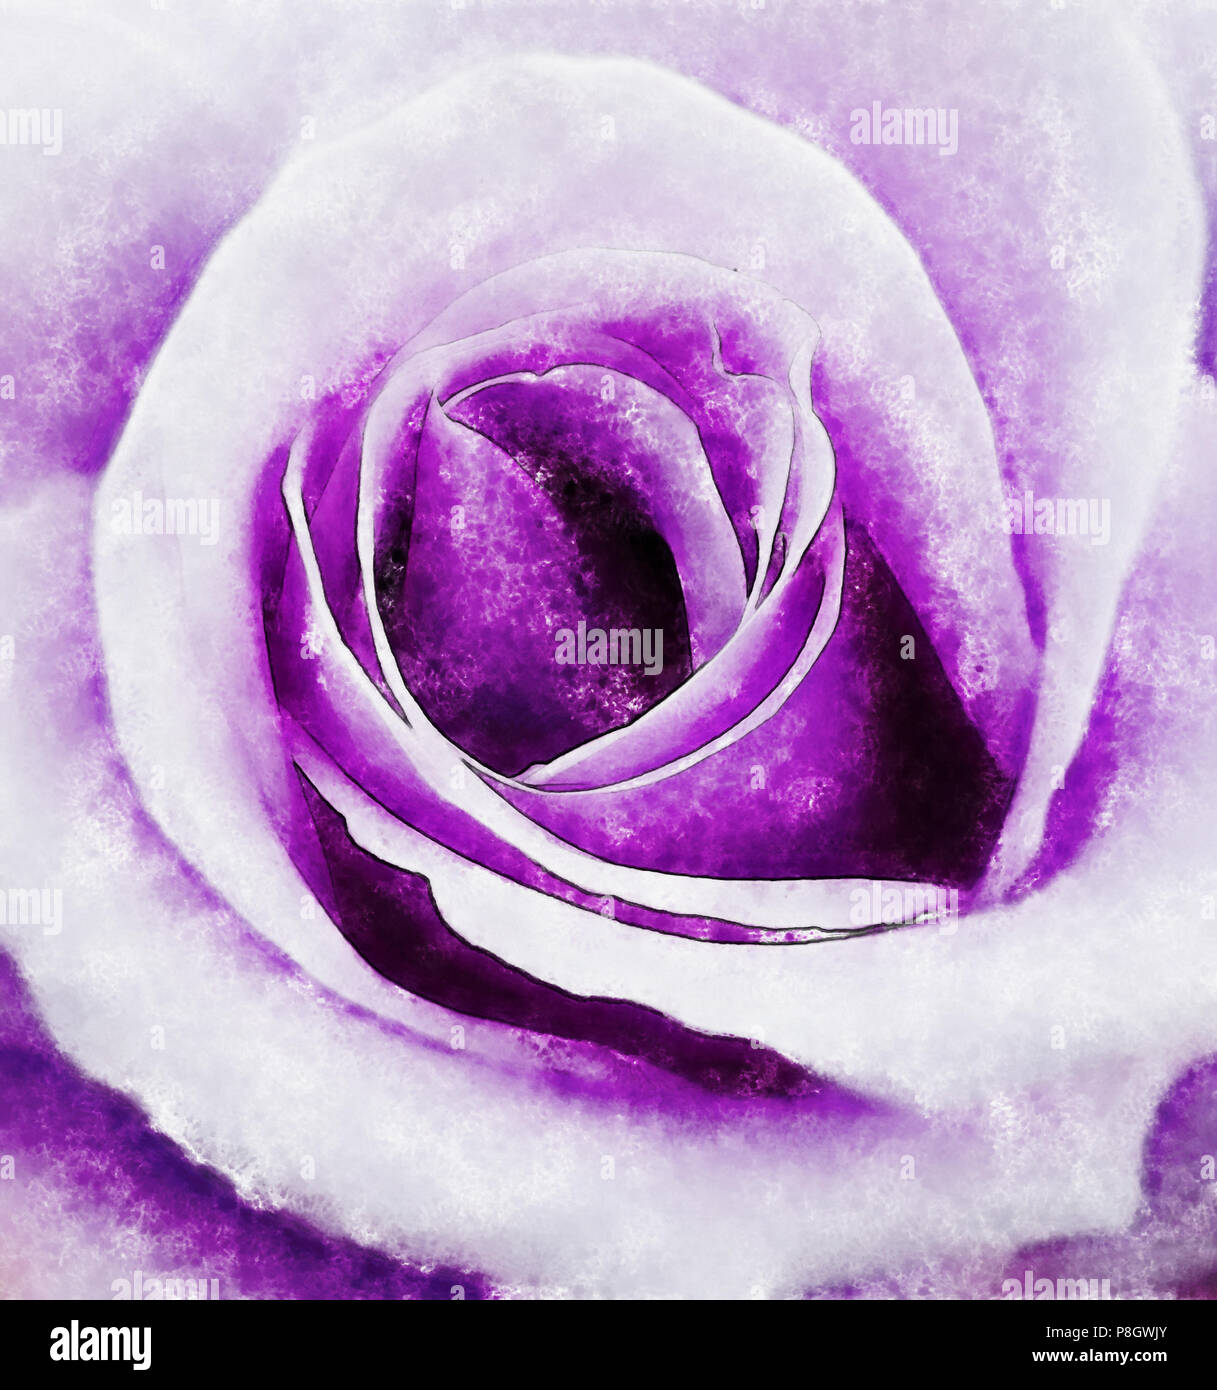 Closeup violet rose fine art, digital painting created by hand using several techniques to resemble watercolor on paper. Stock Photo